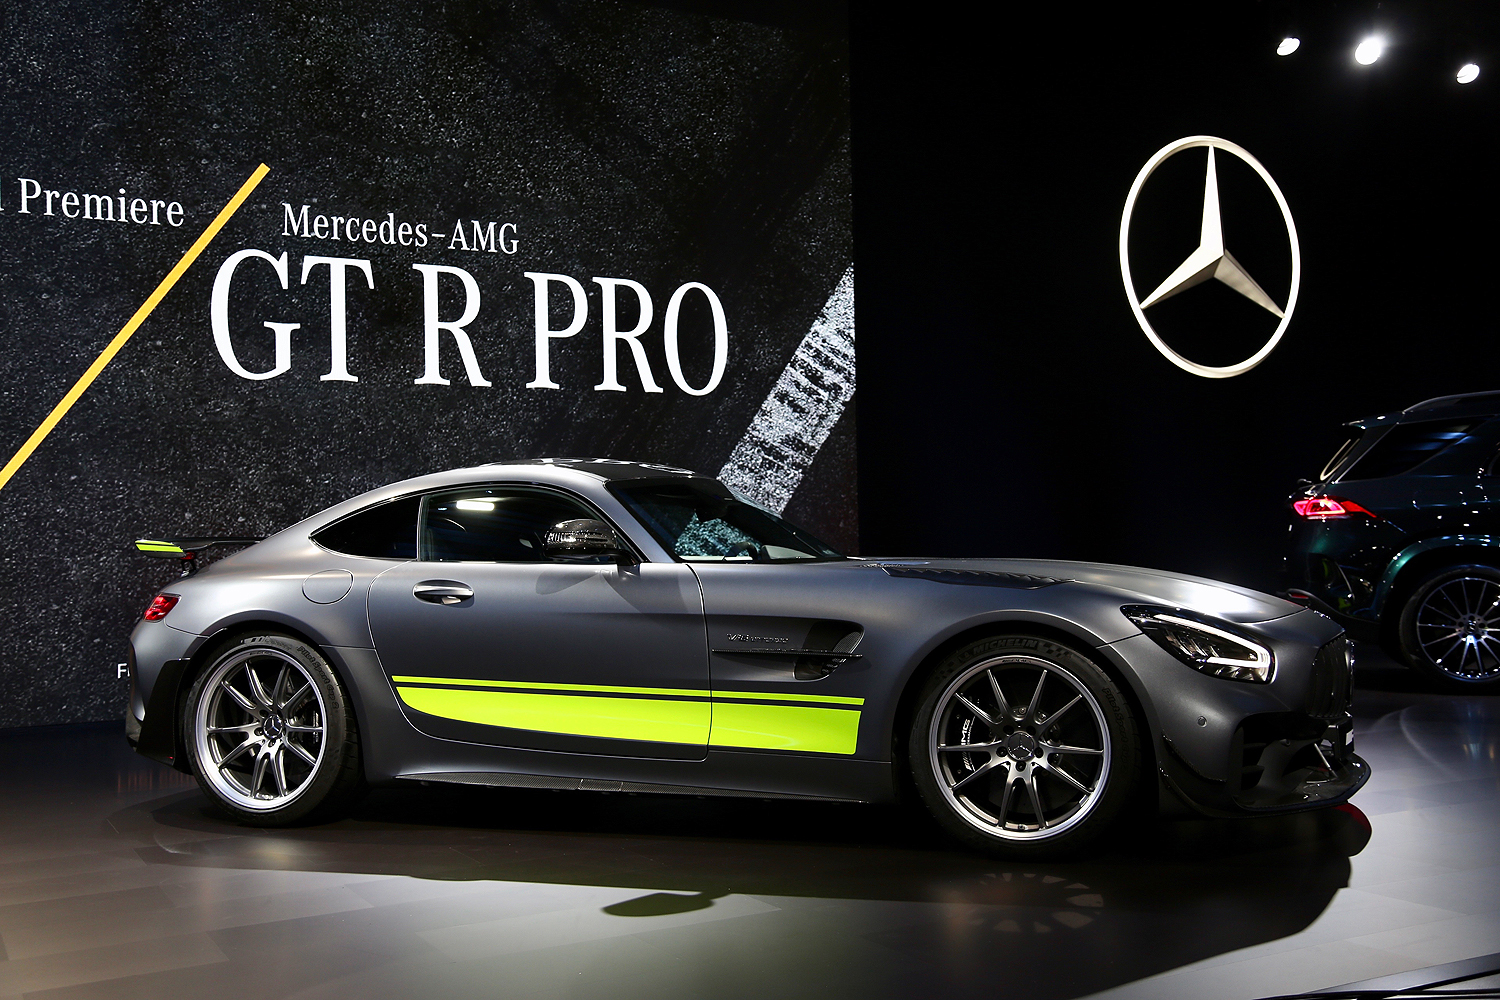 mercedes amg gt lineup gets new tech features r pro model mb 4